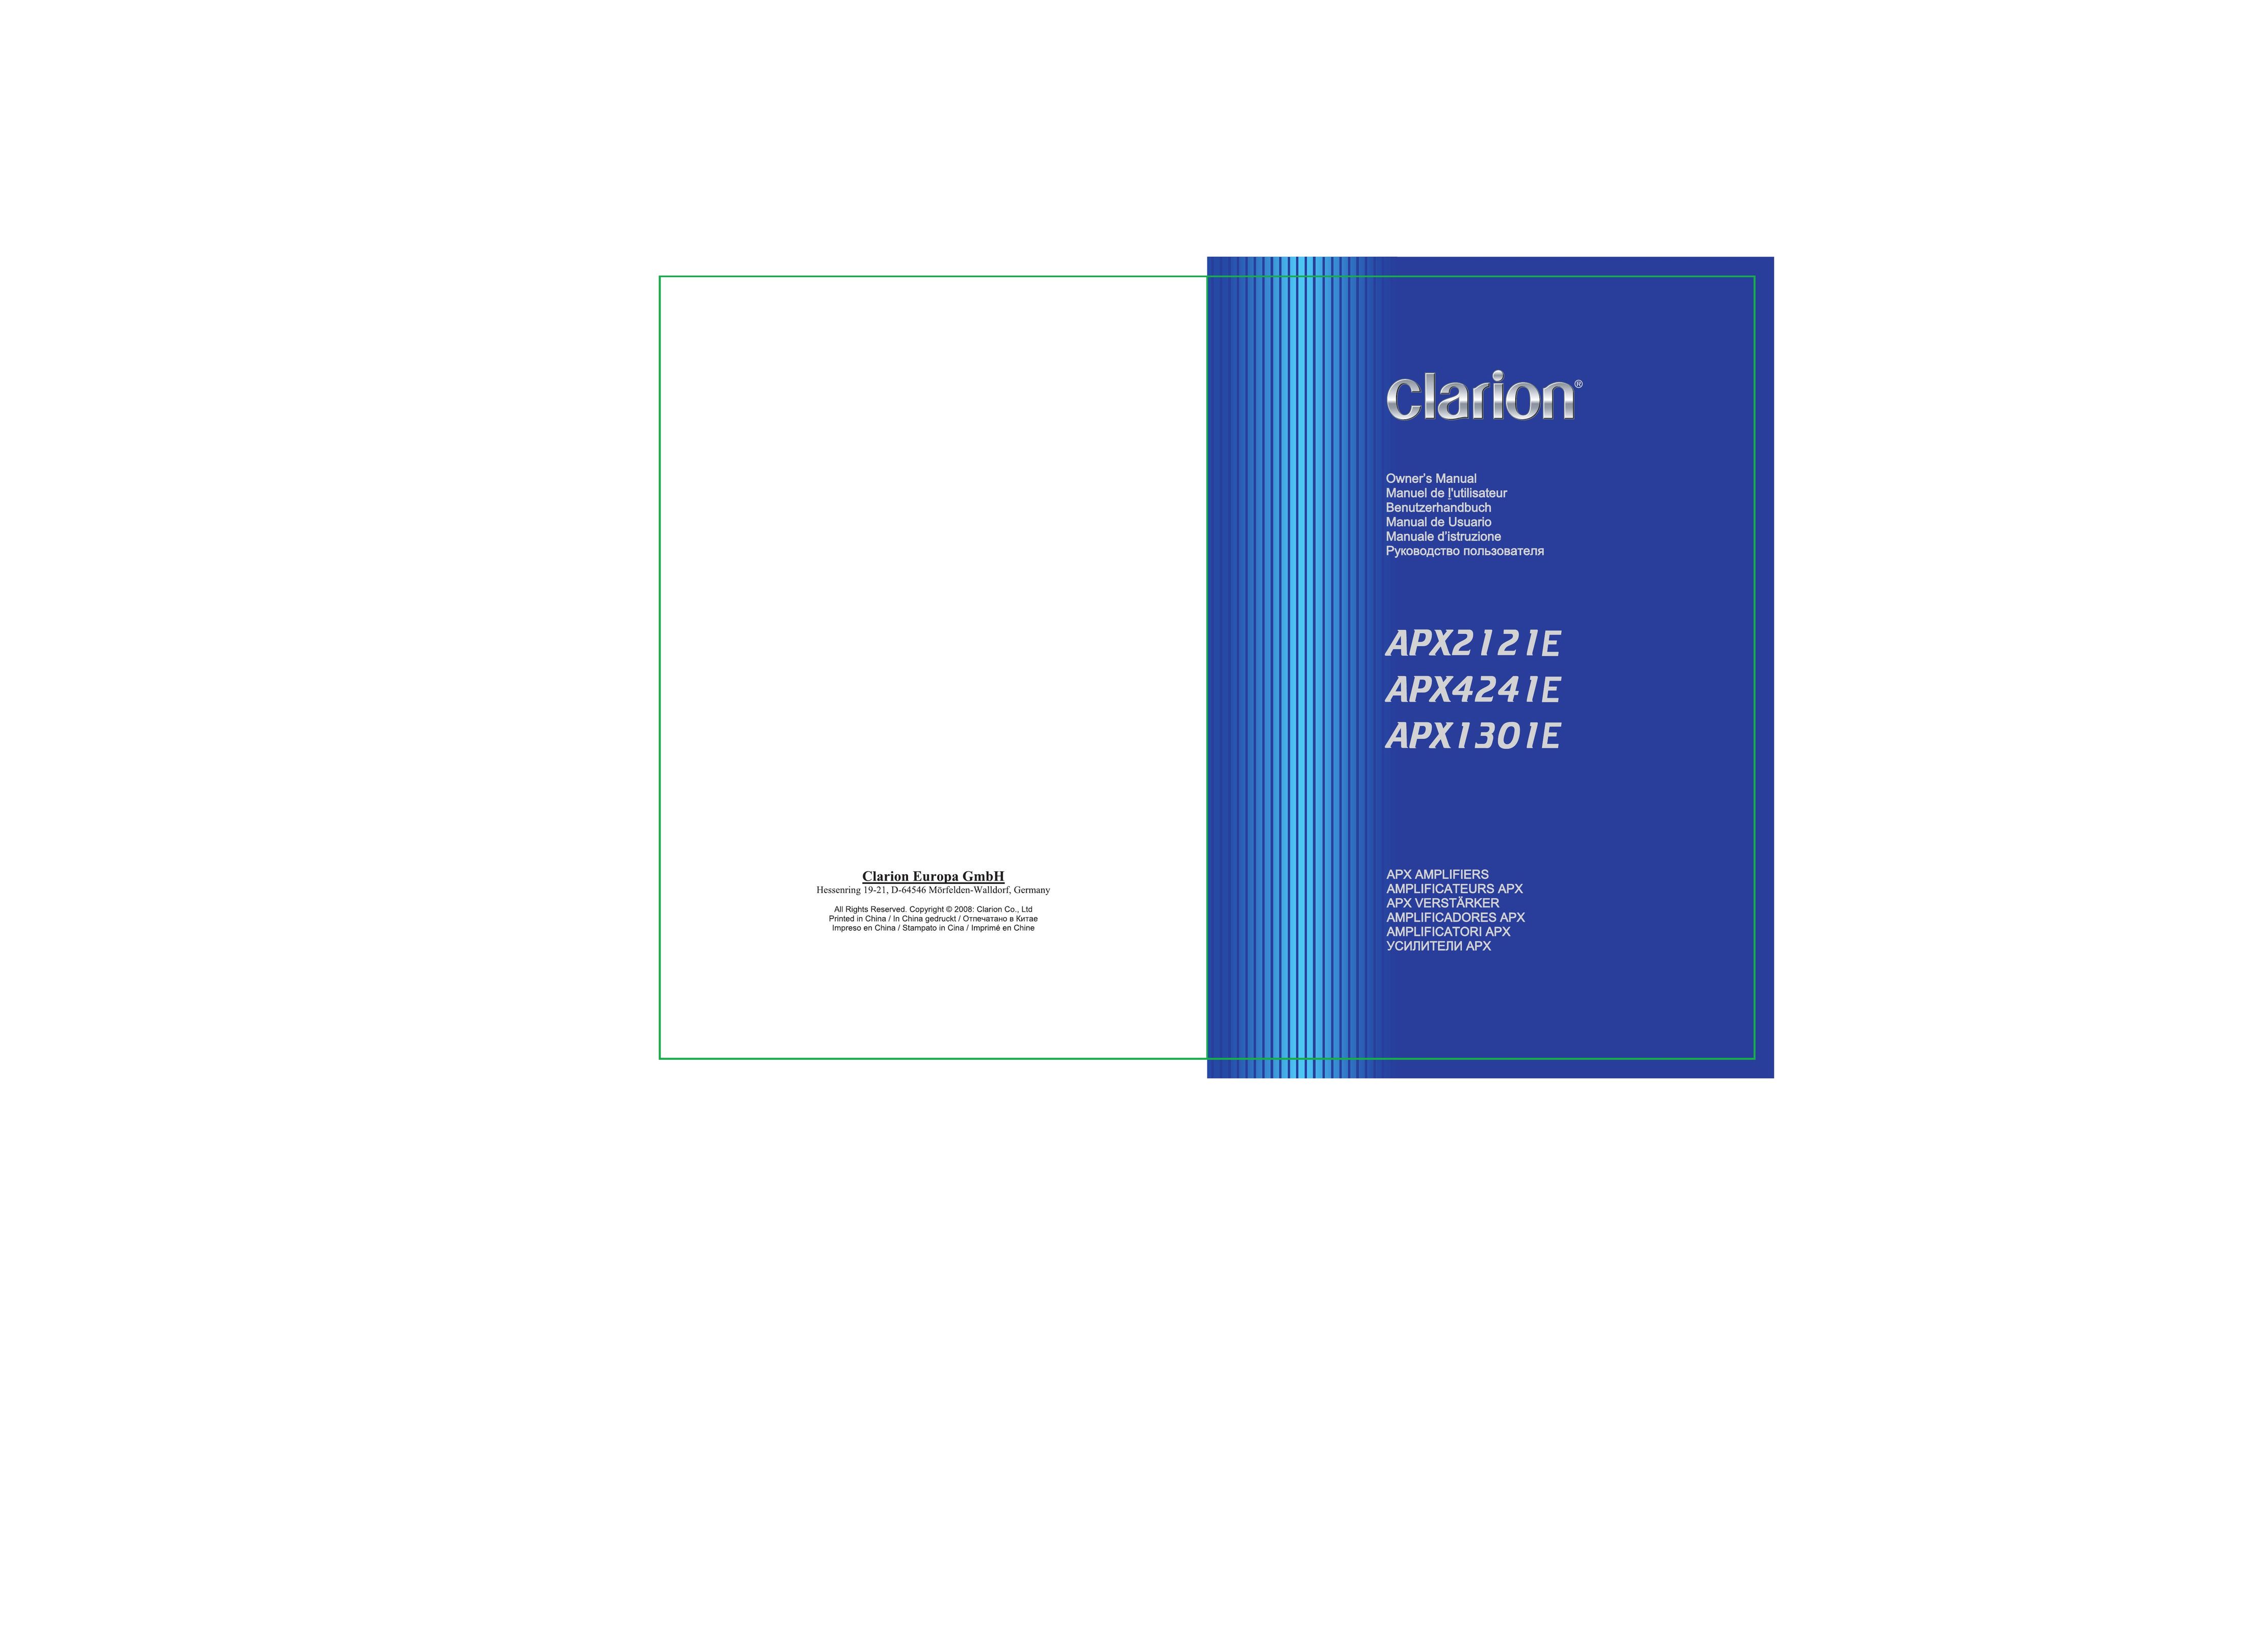 Clarion APX1301E Stereo Amplifier User Manual